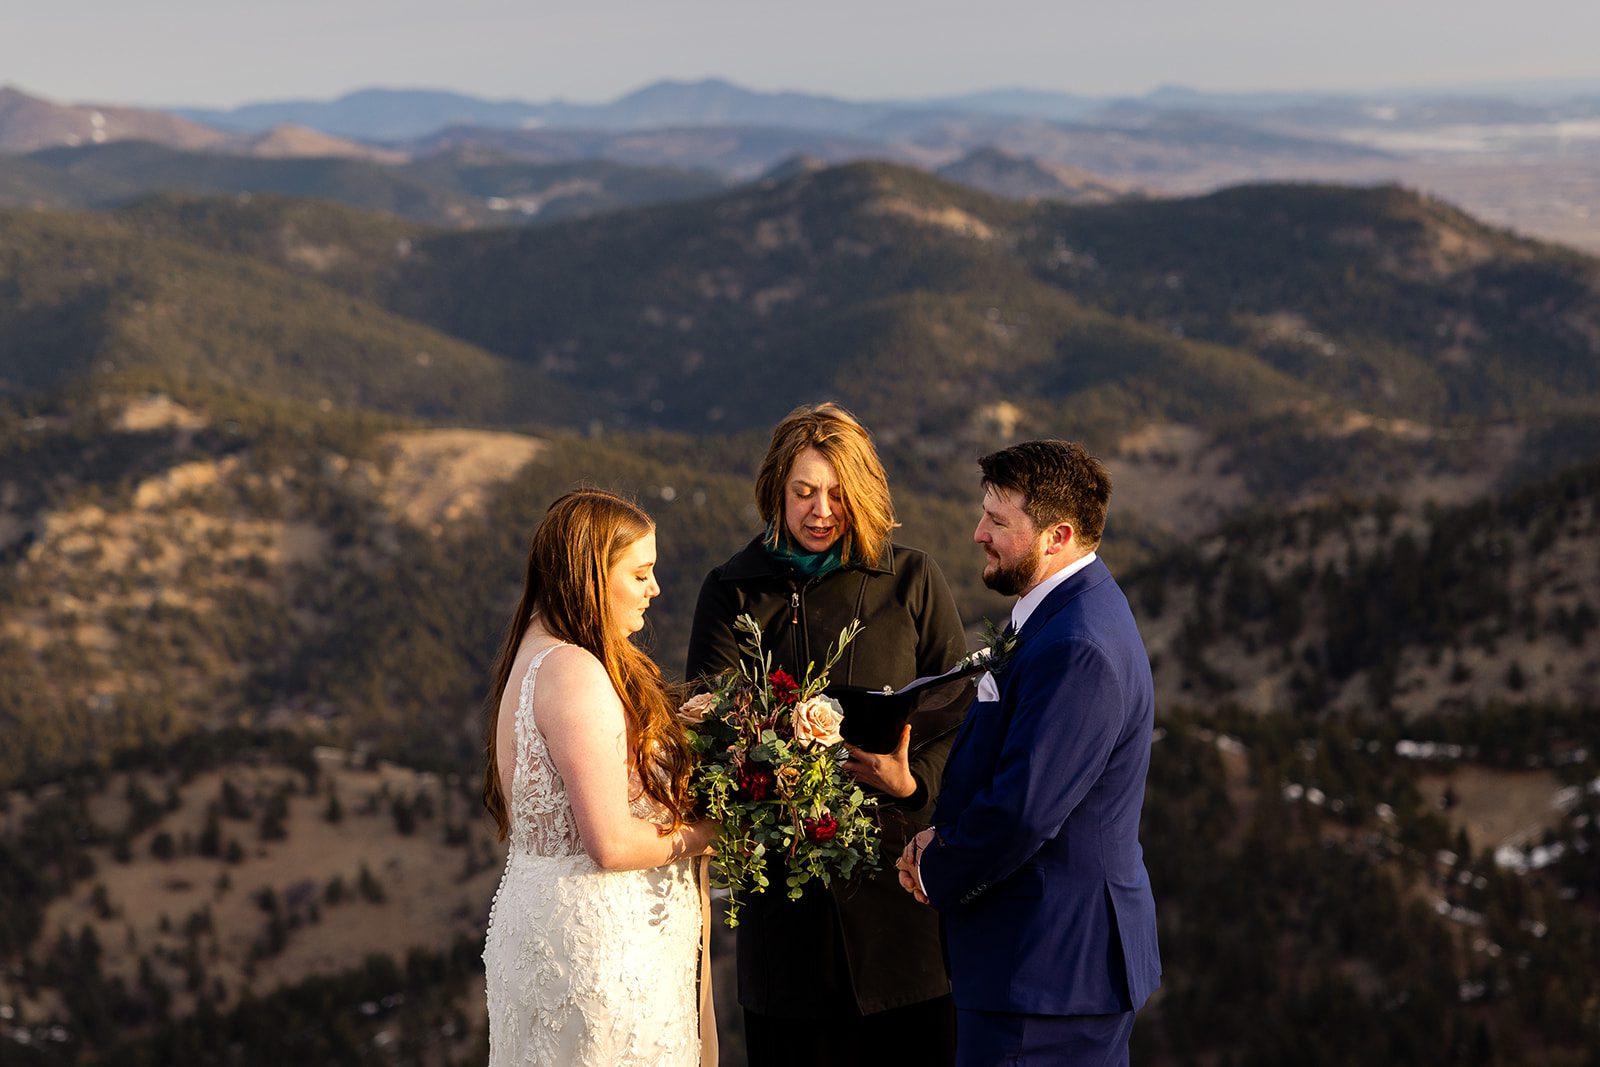 A Lost Gulch elopement ceremony with videography.